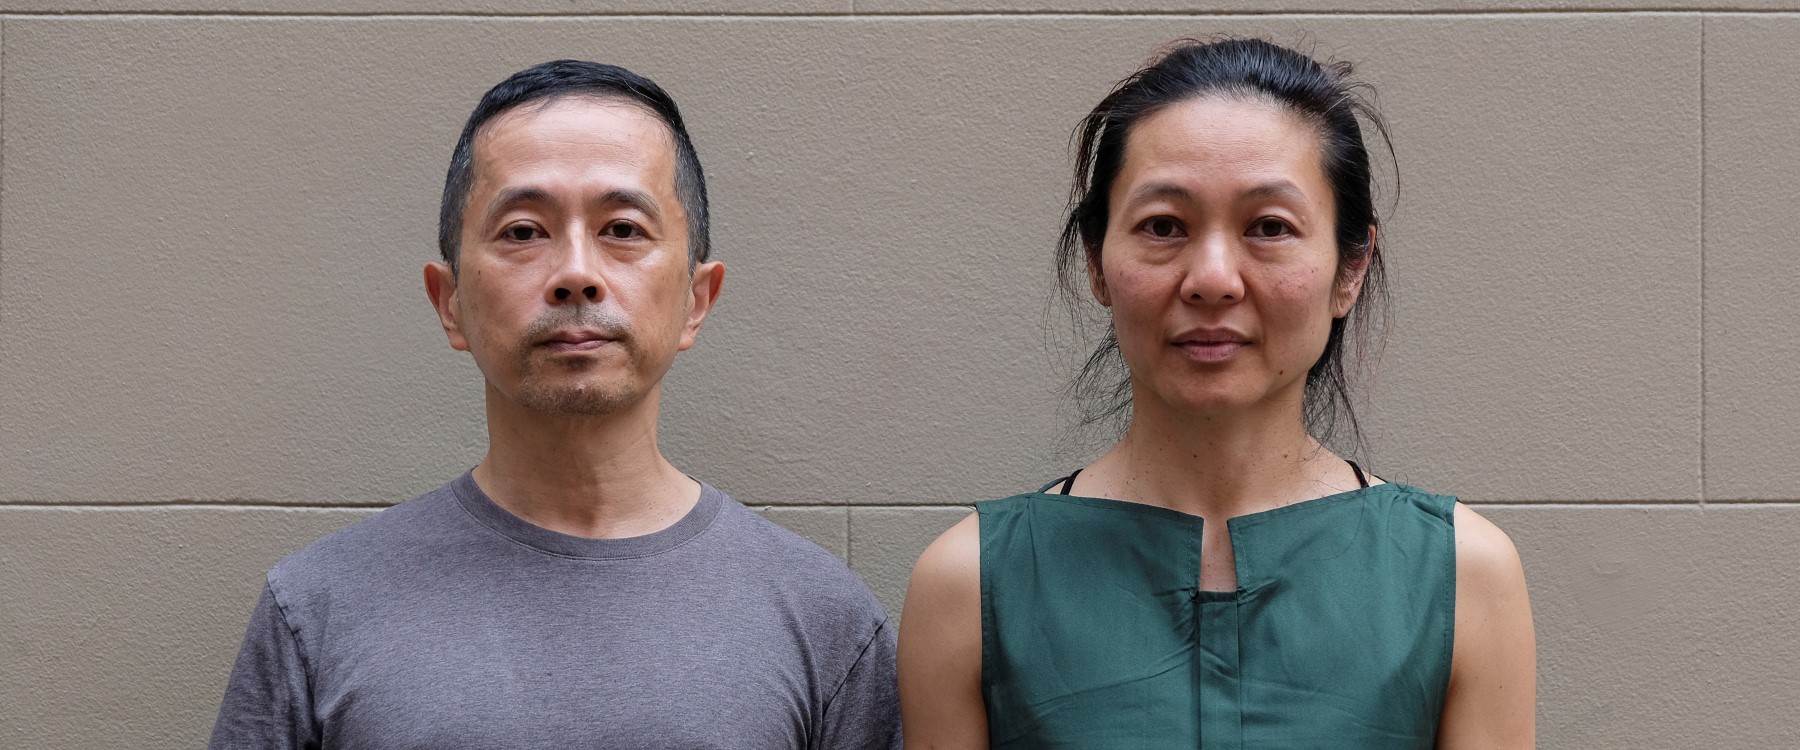 Two people stand against a grey wall looking straight at the camera with straight faces. One wears a grey t shirt with short black and grey hear, the other wears a green sleeveless shirt with tied back black hair